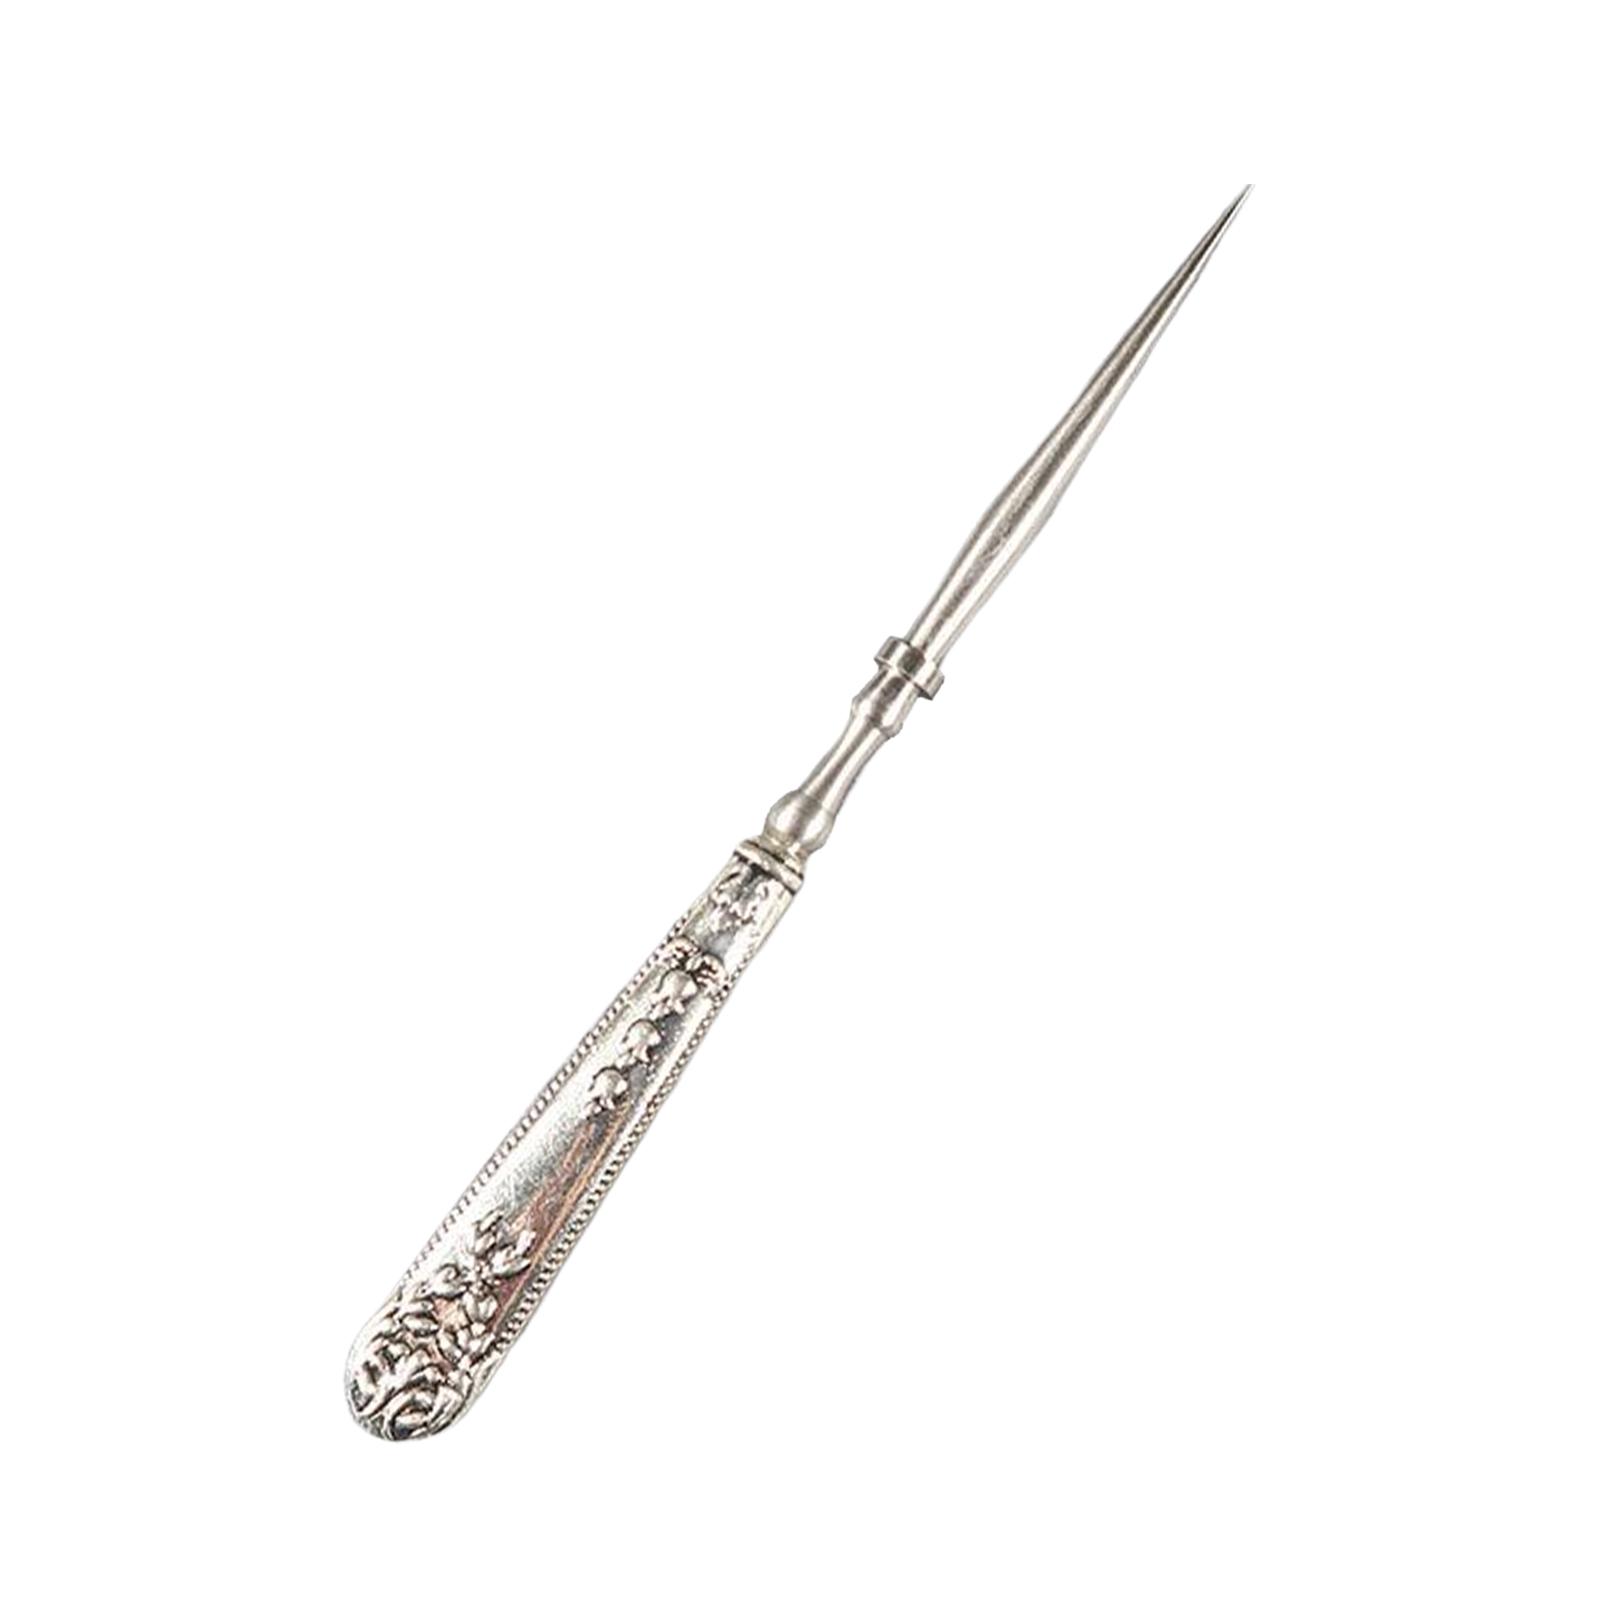 Portable Leather Punch Hole Awl, Leathercraft Punching , Repair Tool Tailors Sewing Equipment, Size: Length 12cm, Silver